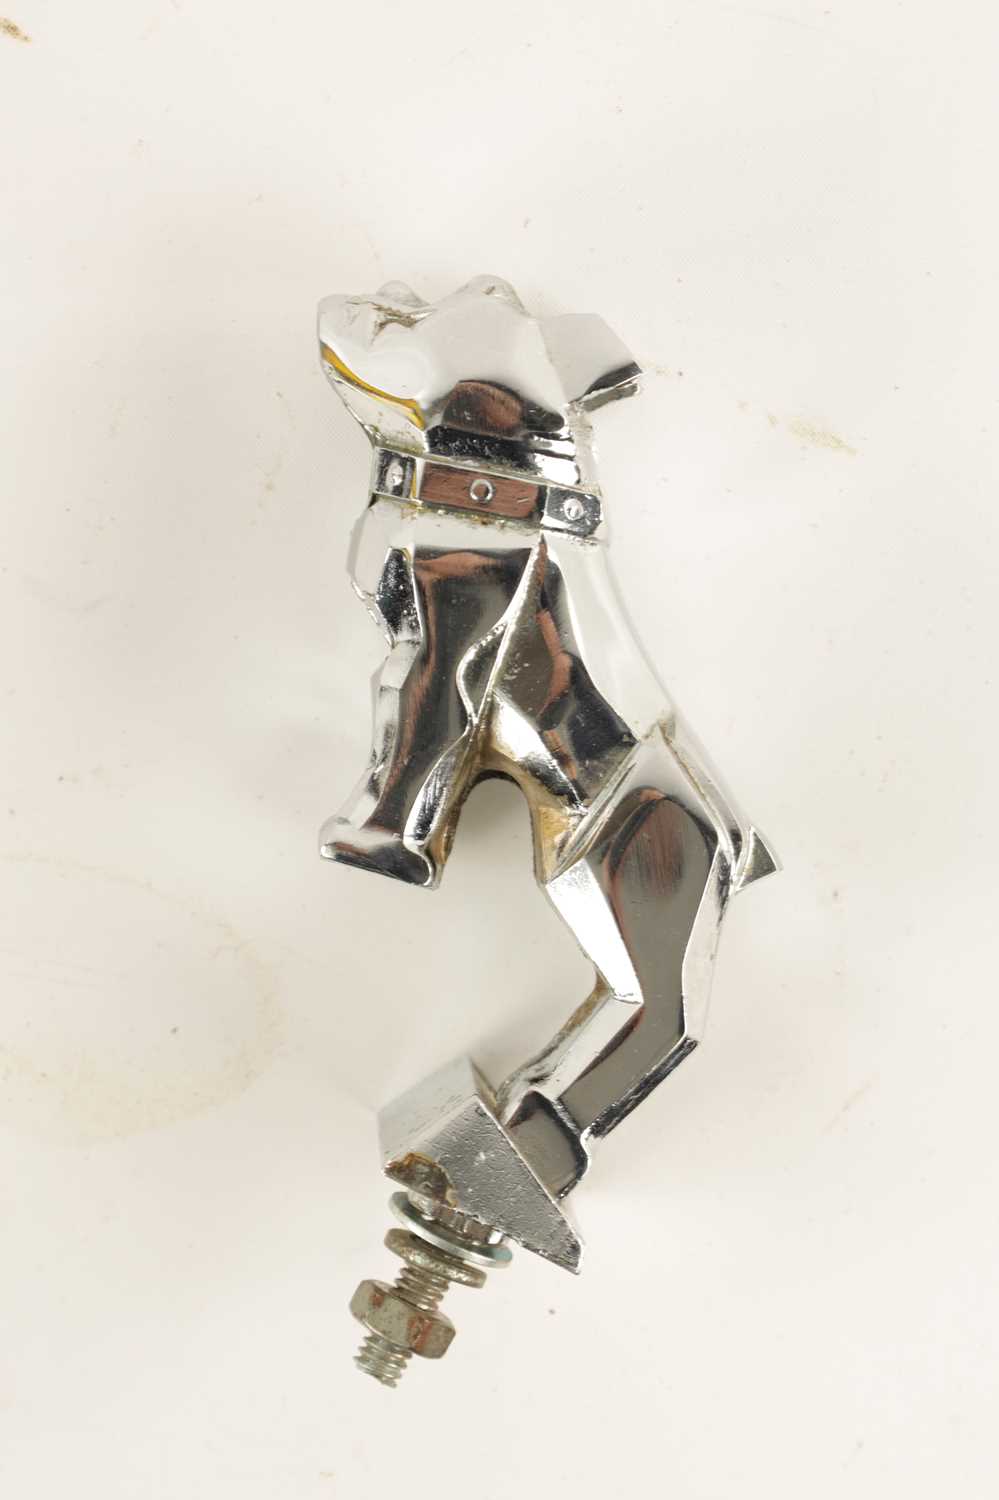 A VINTAGE CHROMED MAC TRUCK RADIATOR BULLDOG MASCOT TOGETHER WITH A CALORIMETER AND RADIATOR CAP WIT - Image 4 of 11